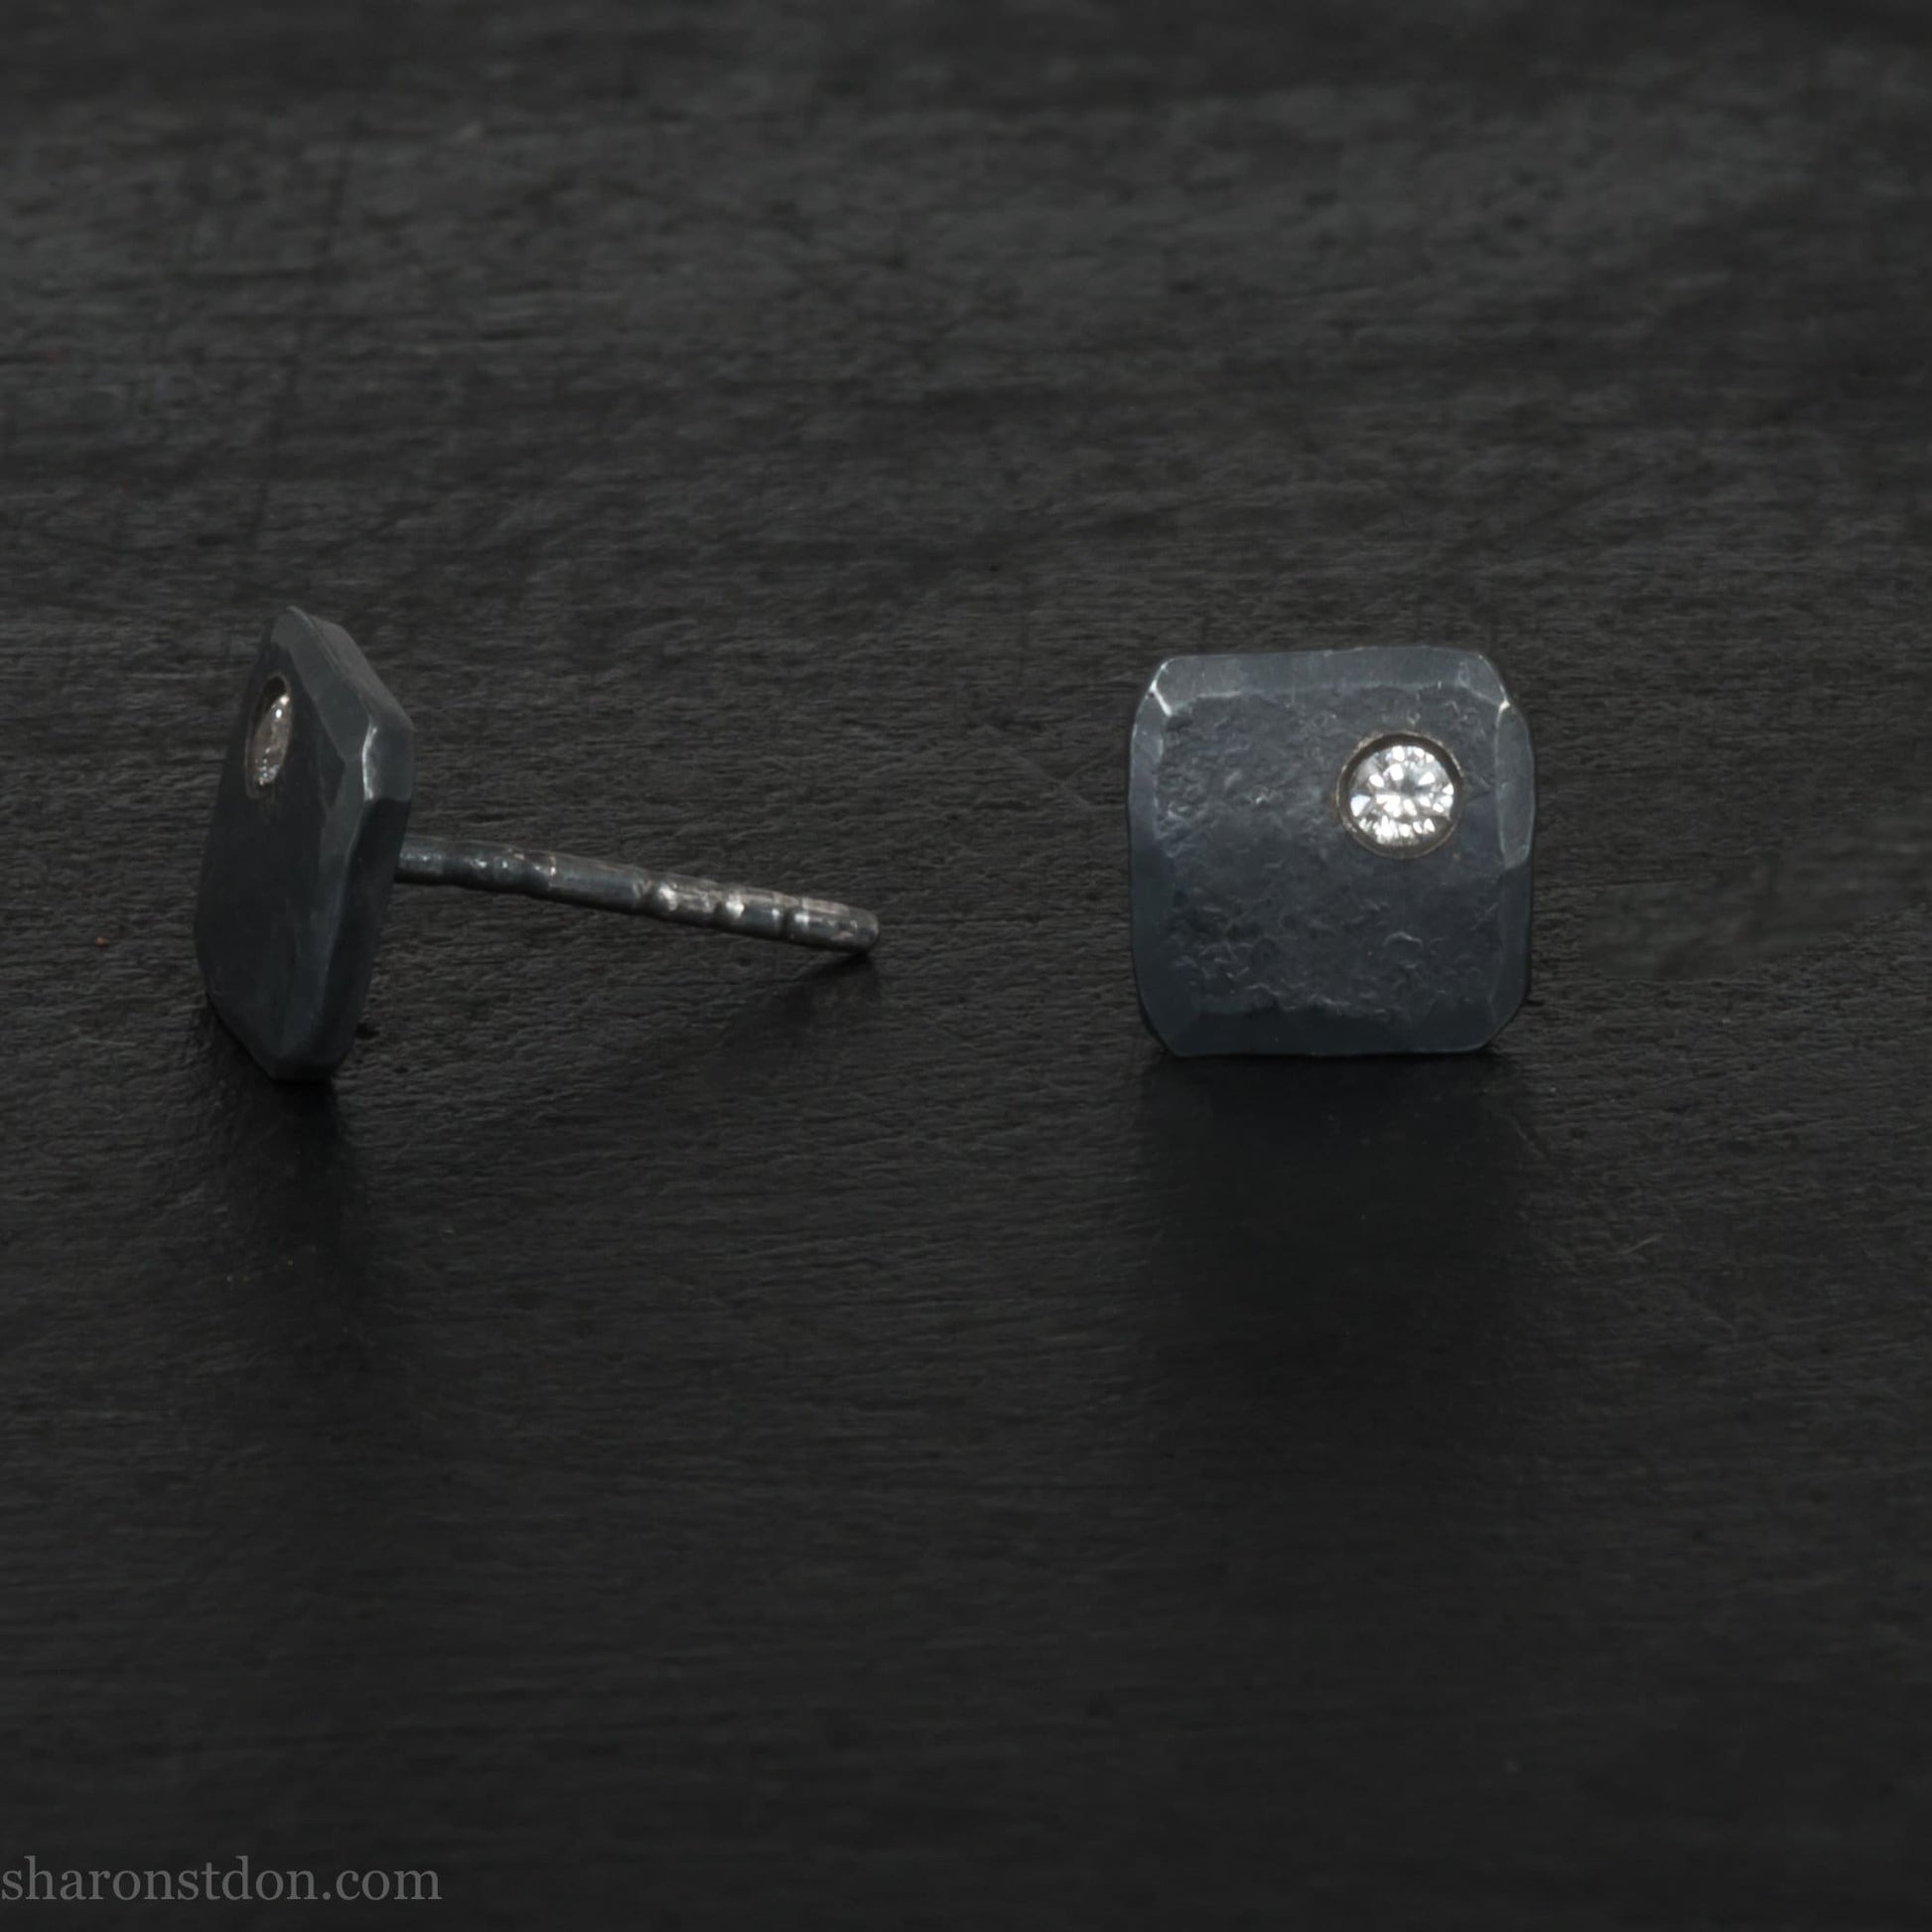 7mm square 925 sterling silver stud earrings with an imitation diamond gemstone in the corner. Hammered texture with a matte, charcoal, oxidized black finish. Handmade by Sharon SaintDon in North America for men or women.